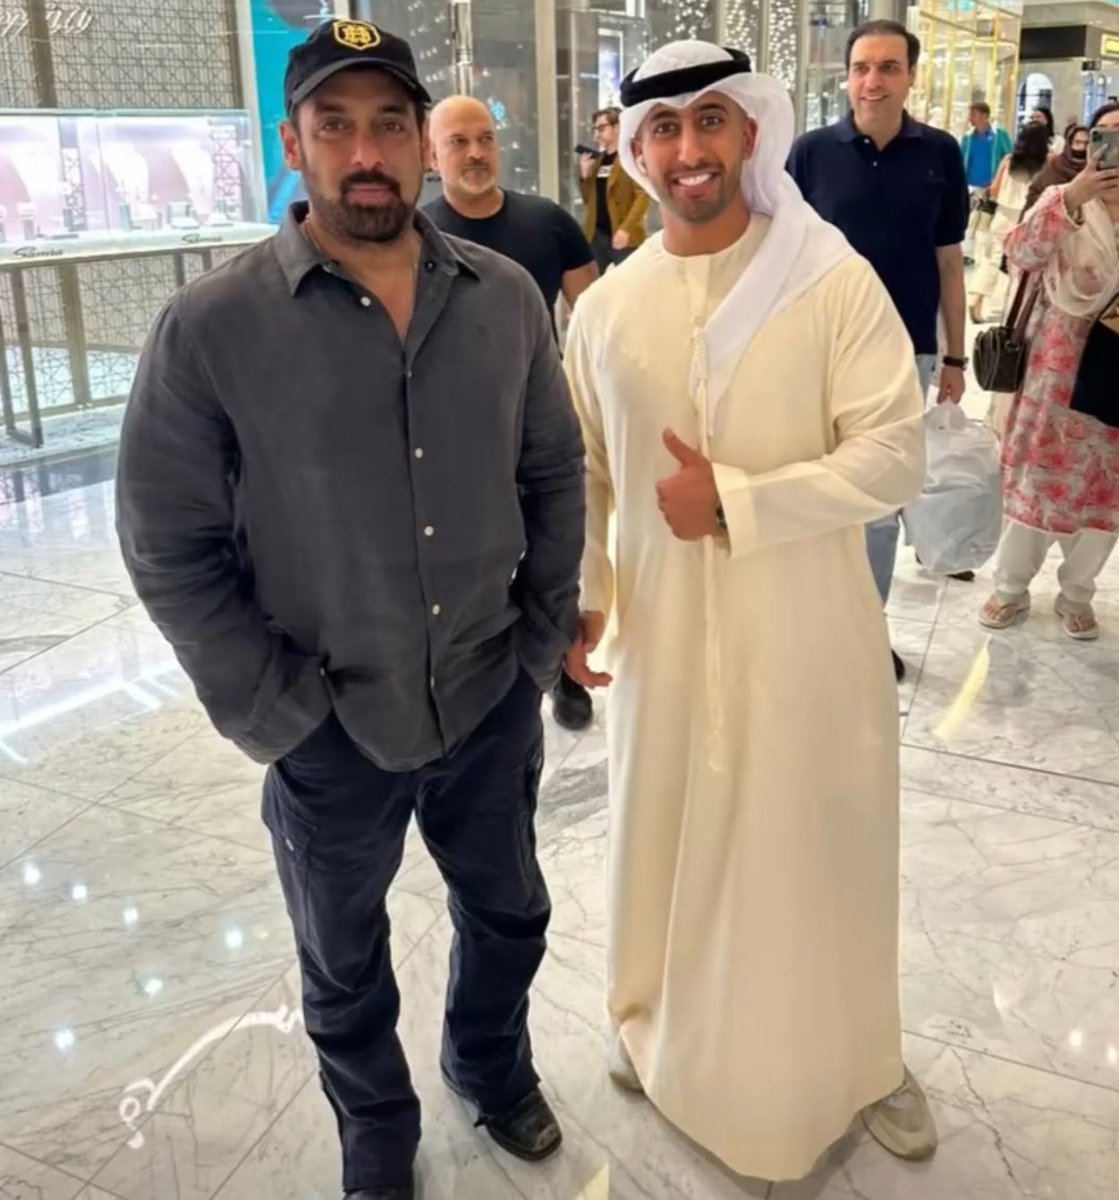 Latest : megastar #SalmanKhan with an immigration officer at the Dubai airport